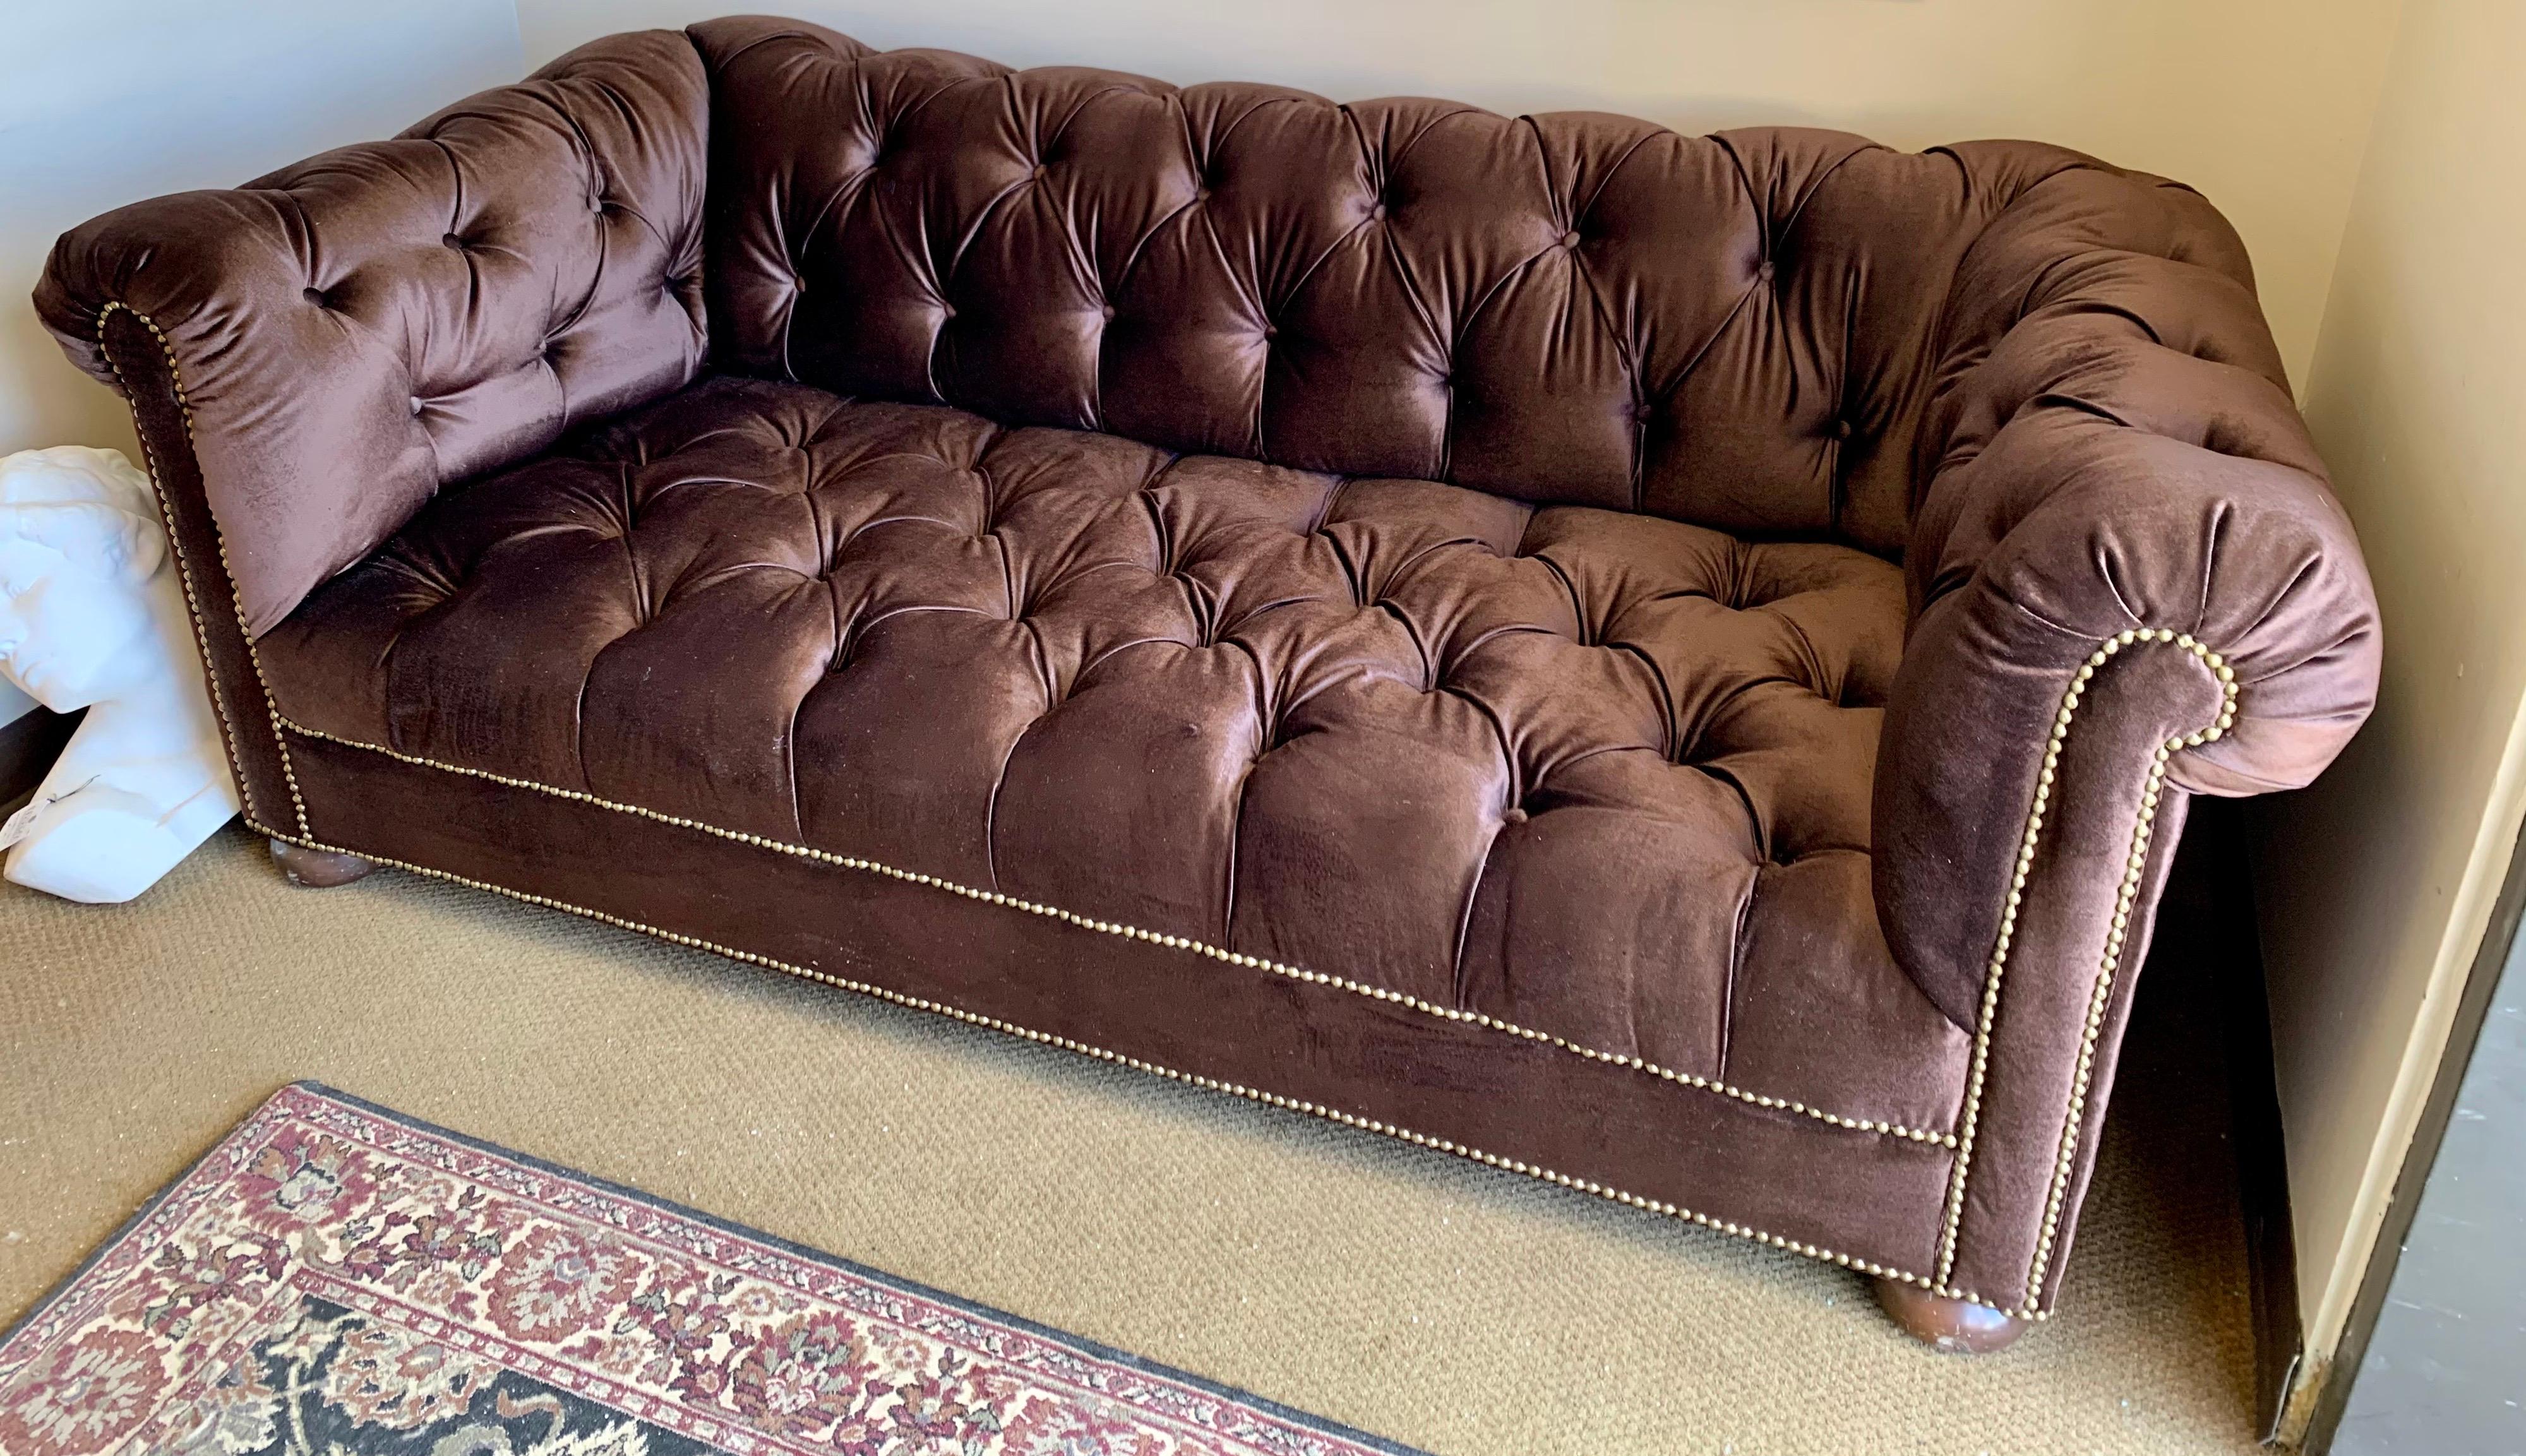 American Brunschwig & Fils Chesterfield Sofa Newly Upholstered in Chocolate Brown Velvet